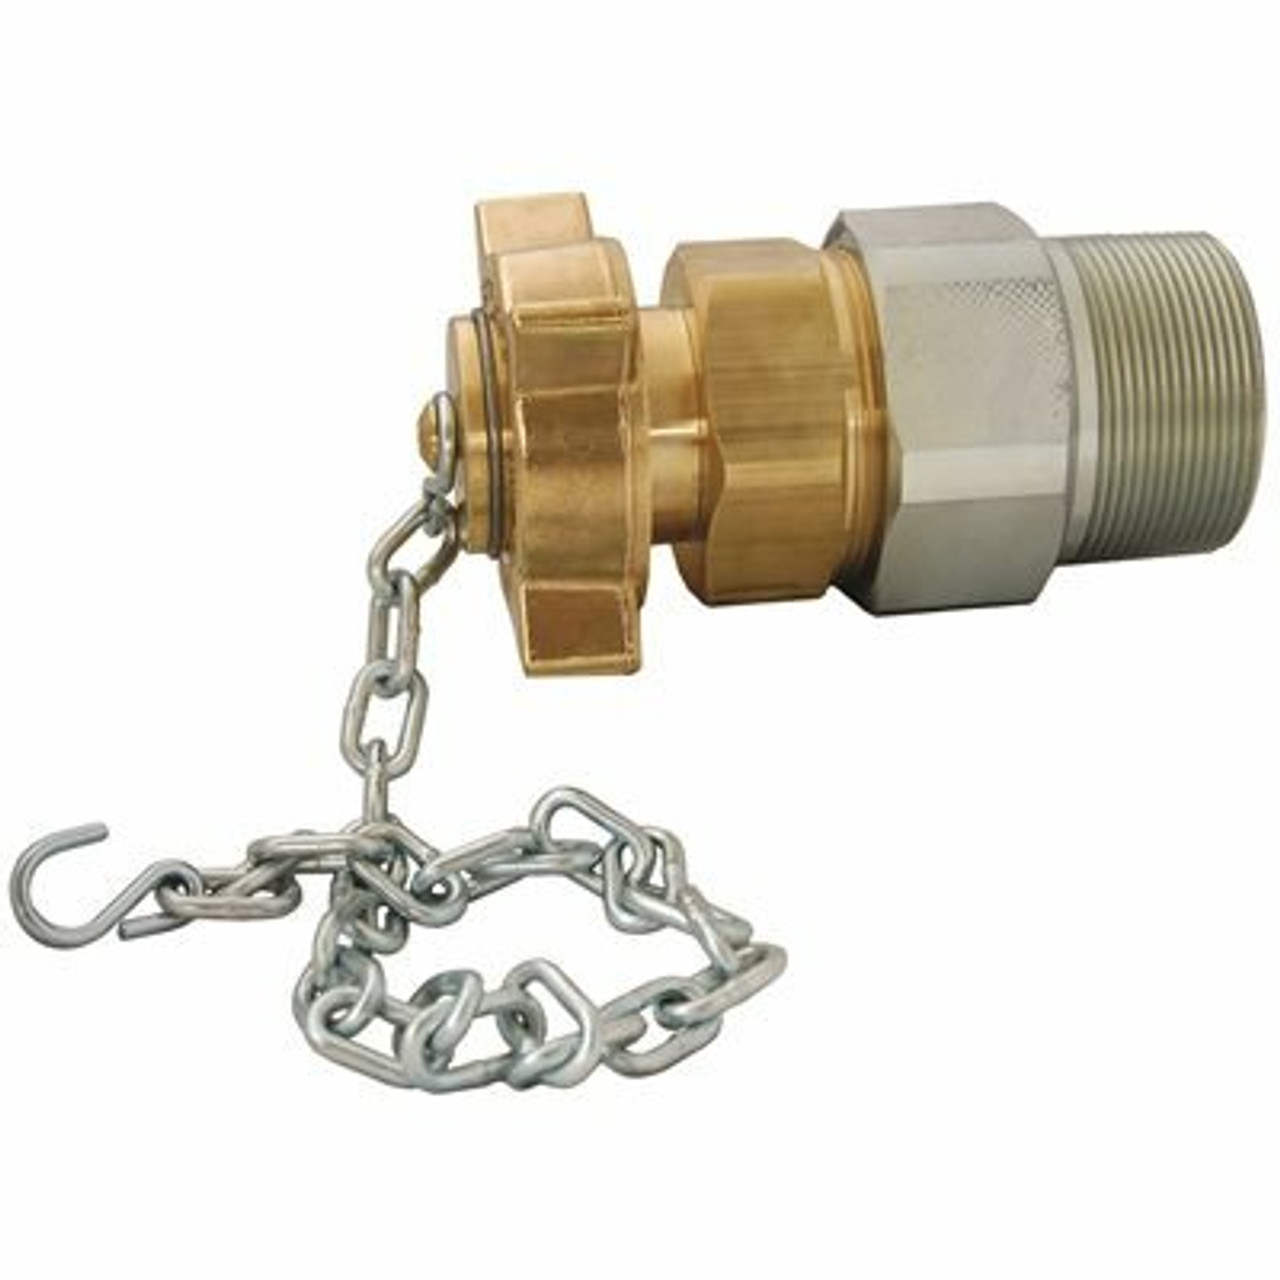 Marshall Excelsior Company Mec Double Check Fill Valve, 3-1/4 In. M. Acme X 3 In. Mnpt, Includes Cap & Chain Assembly